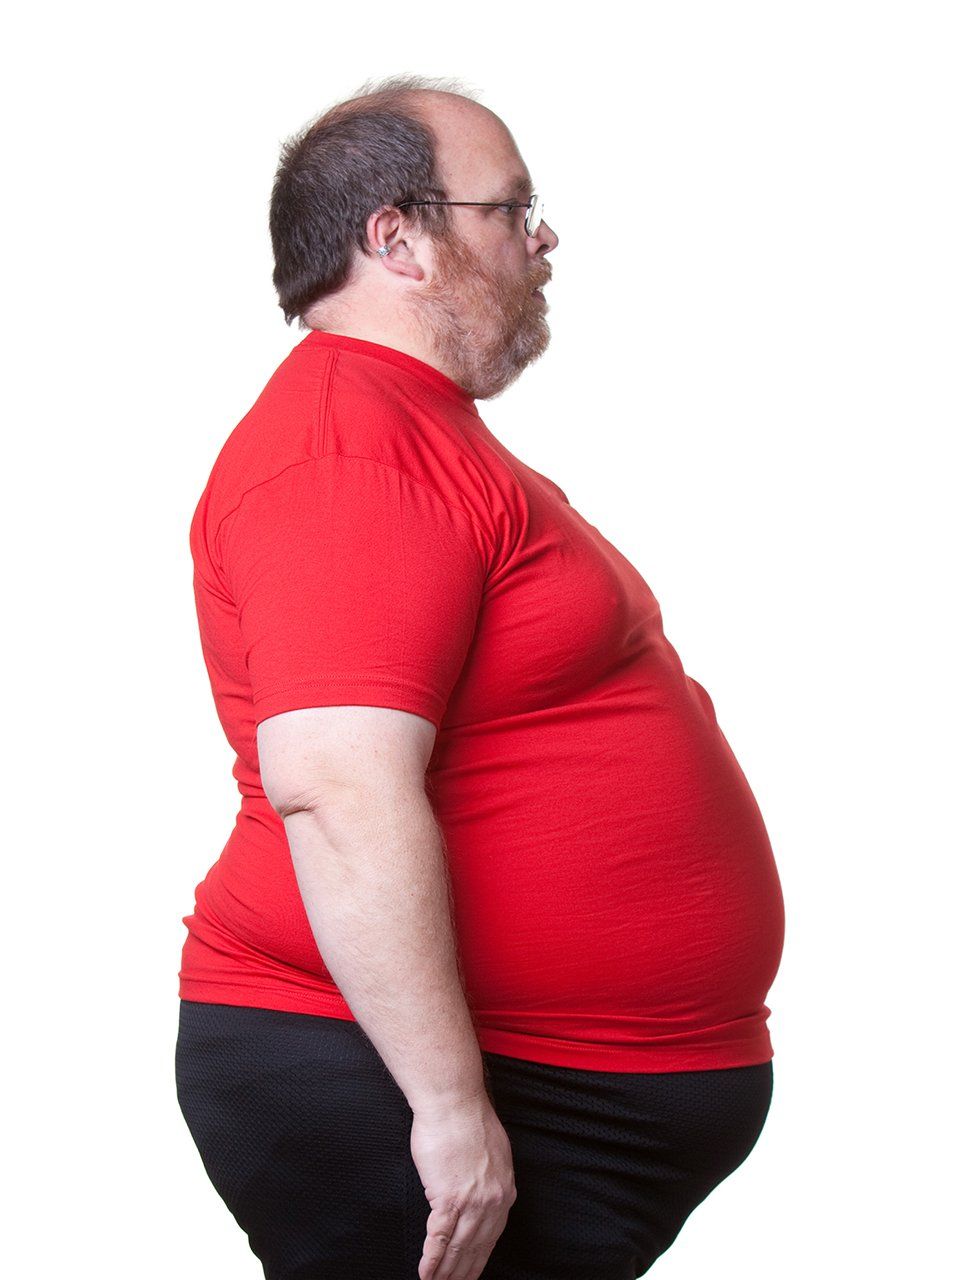 a man in a red shirt has a very large belly